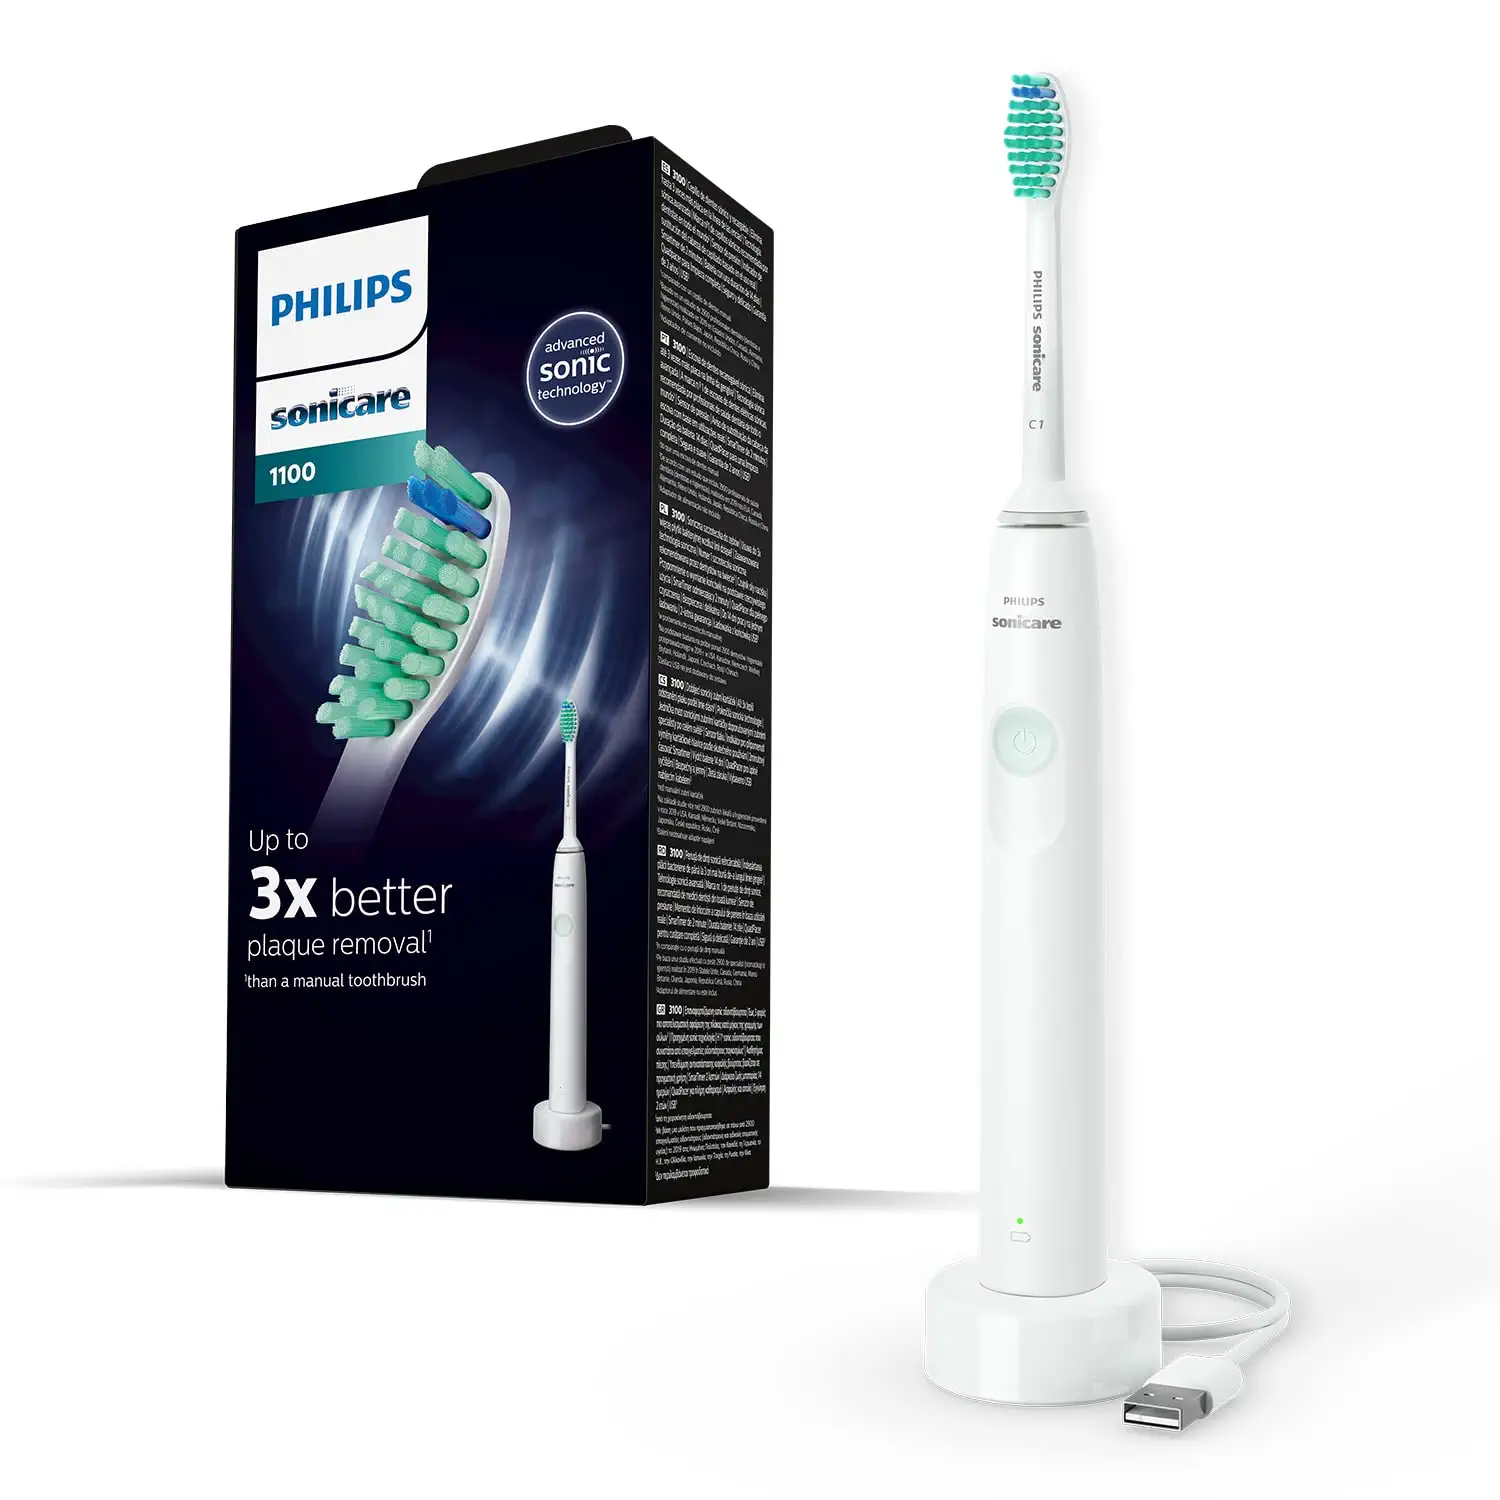 HX3641 Sonicare Series Sonic Philips with Toothbrush Tec 1100 Electric